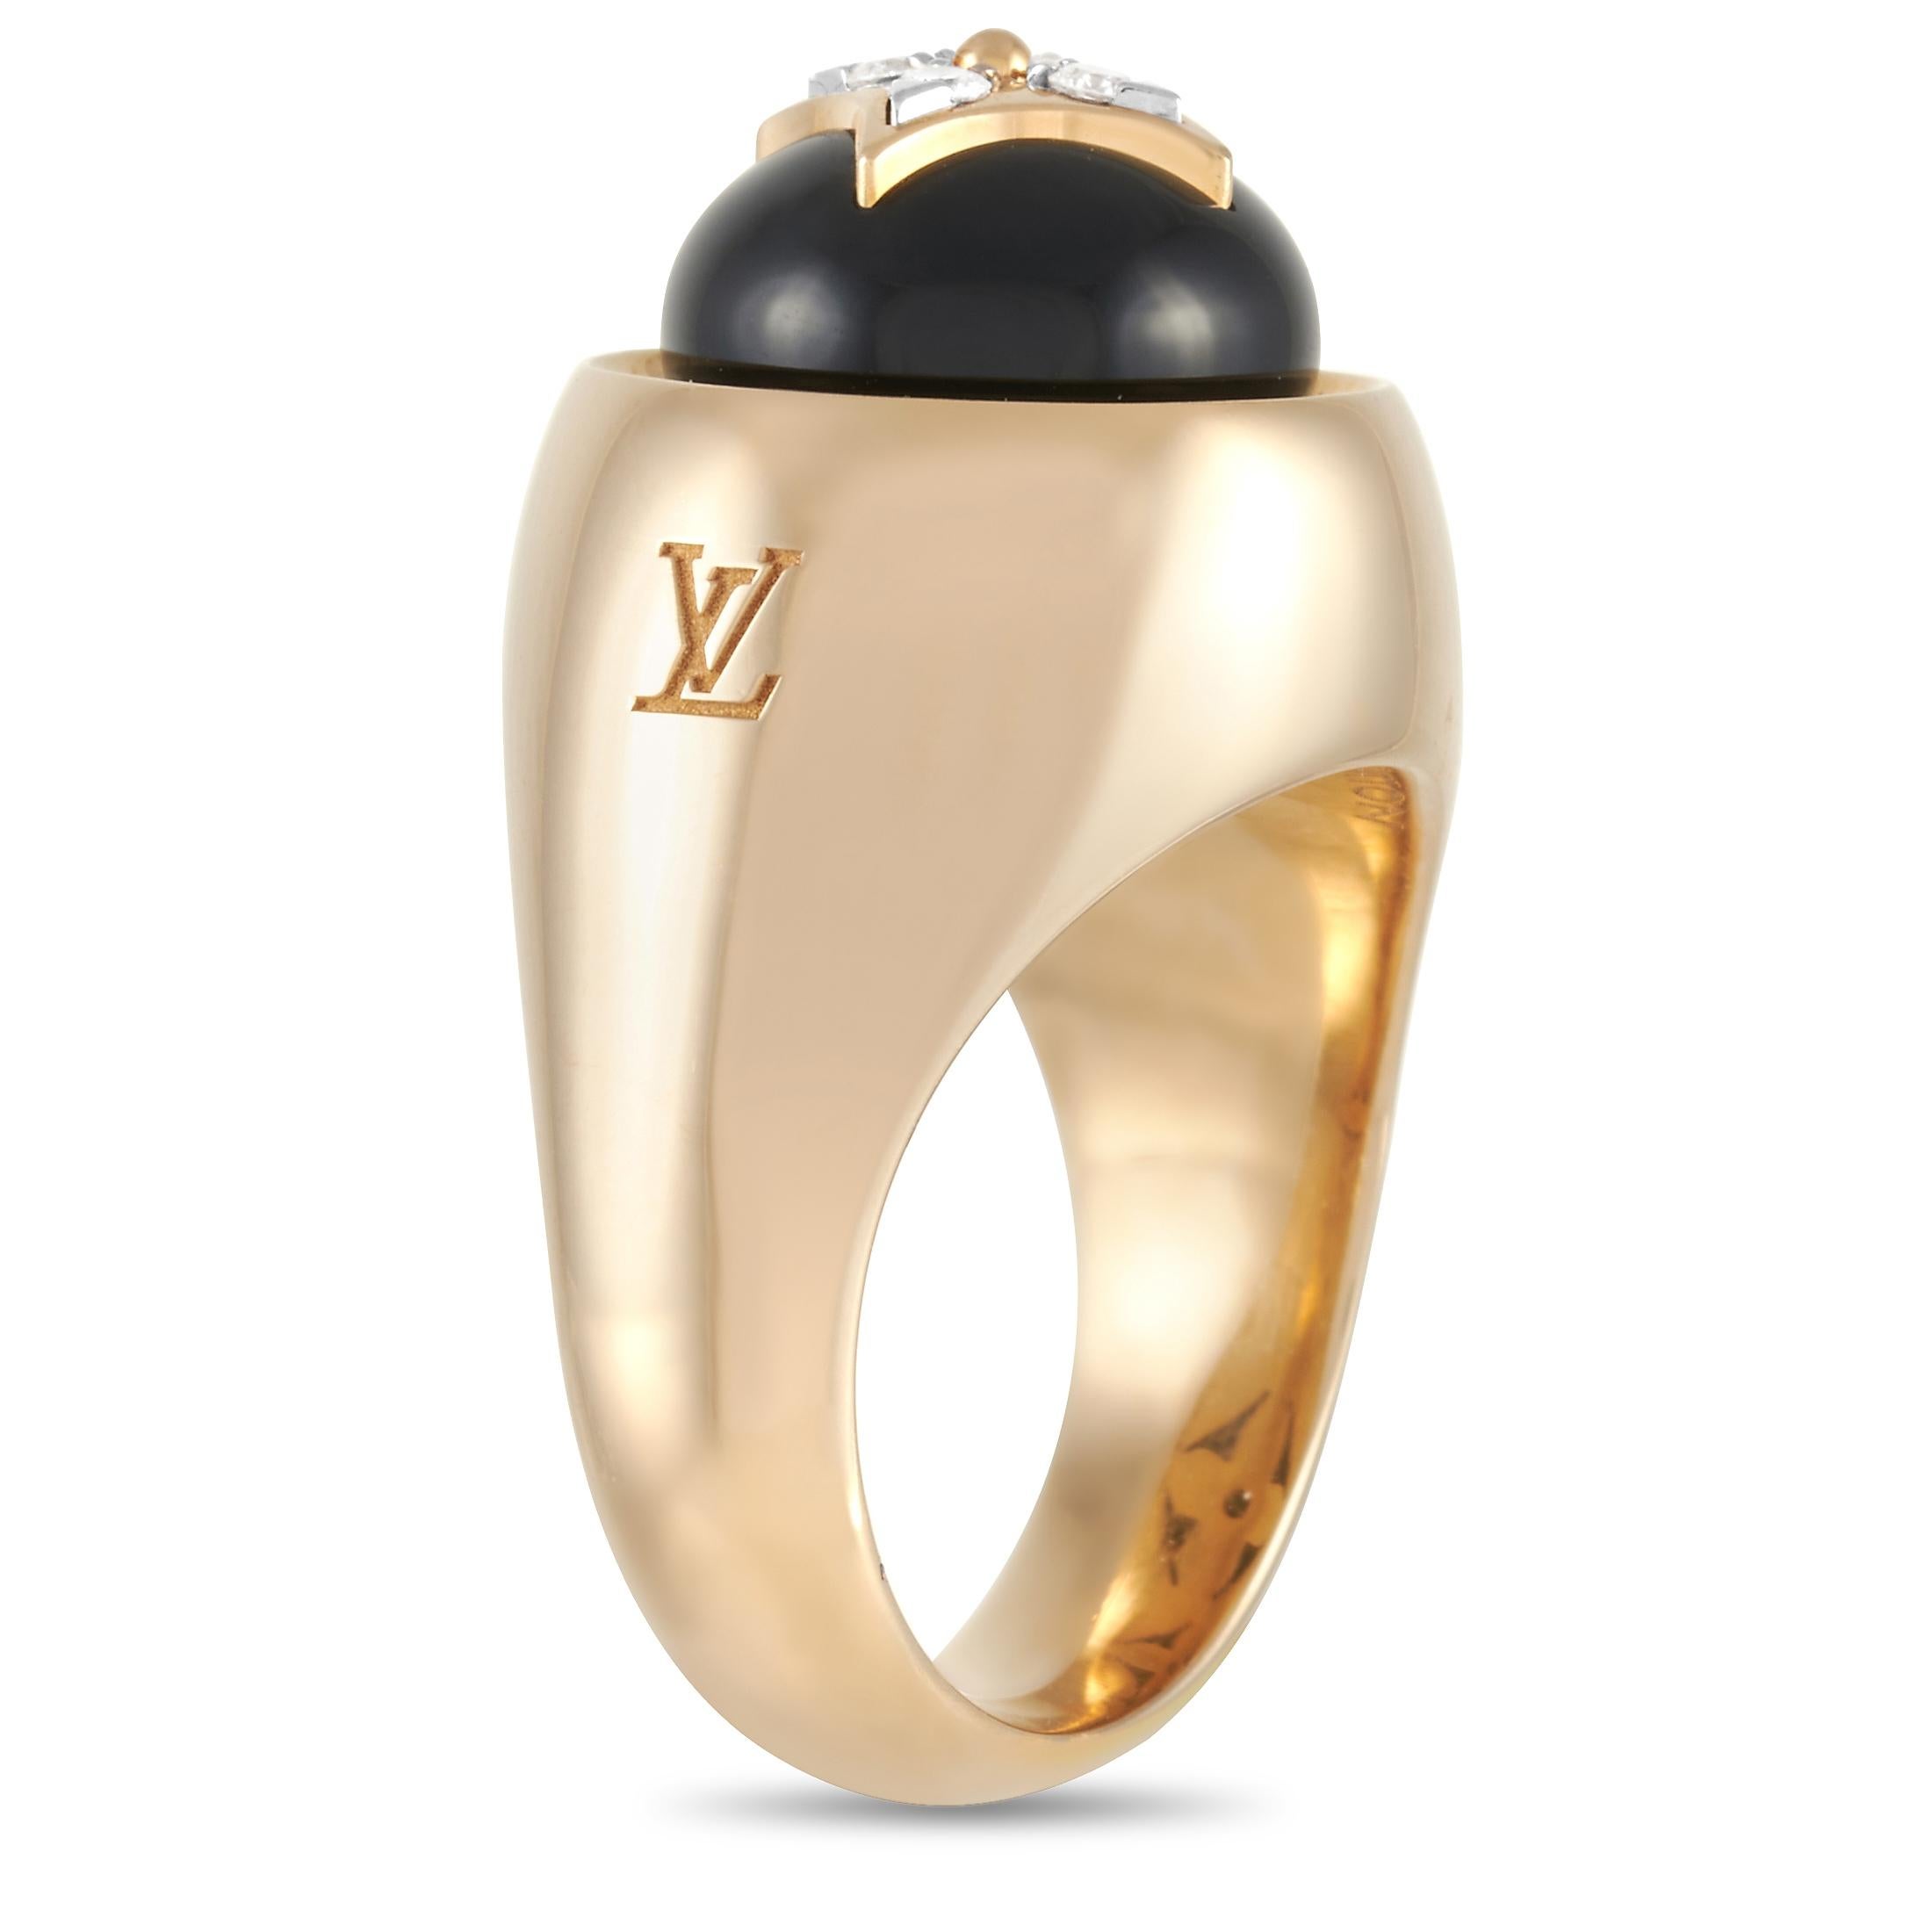 A ring with an attitude. Bold in look and modern in design, this signet ring in 18K yellow gold features a reimagined LV monogram flower. At the top center of the 6mm band with 10mm top height is a round onyx topped with the iconic motif composed of